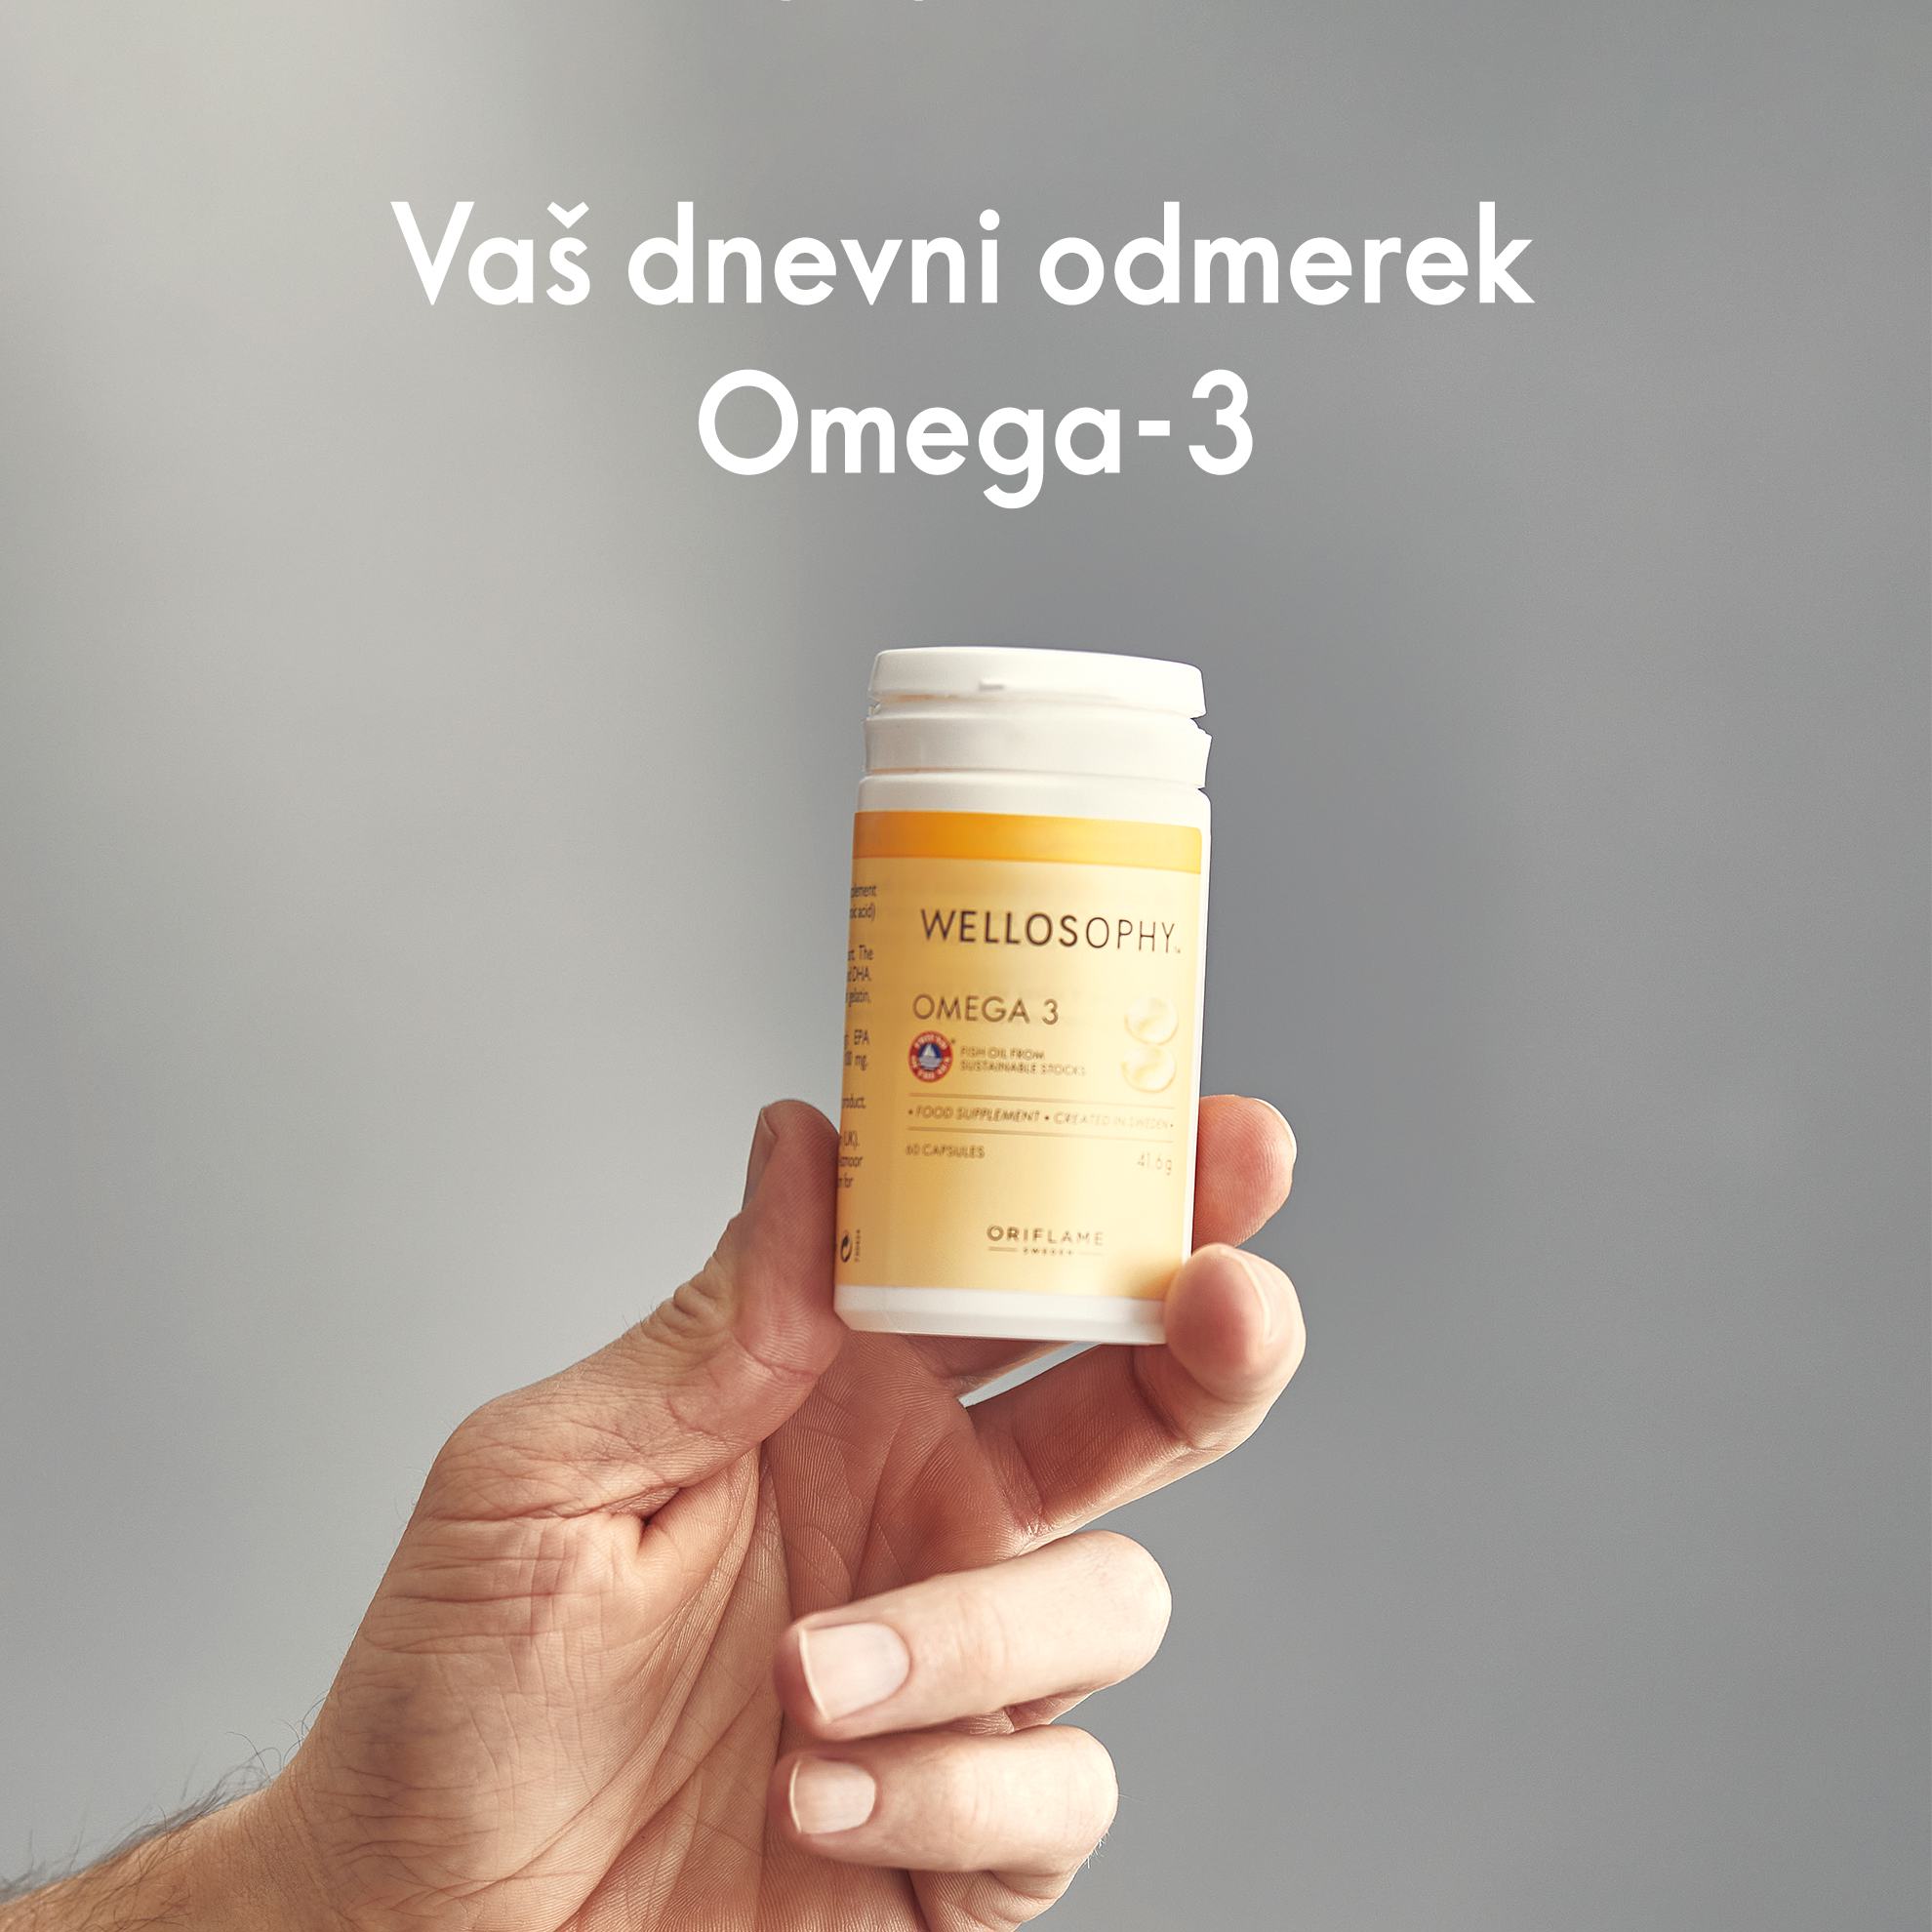 https://media-cdn.oriflame.com/productImage?externalMediaId=product-management-media%2fProducts%2f38556%2fSI%2f38556_3.png&id=18250628&version=1